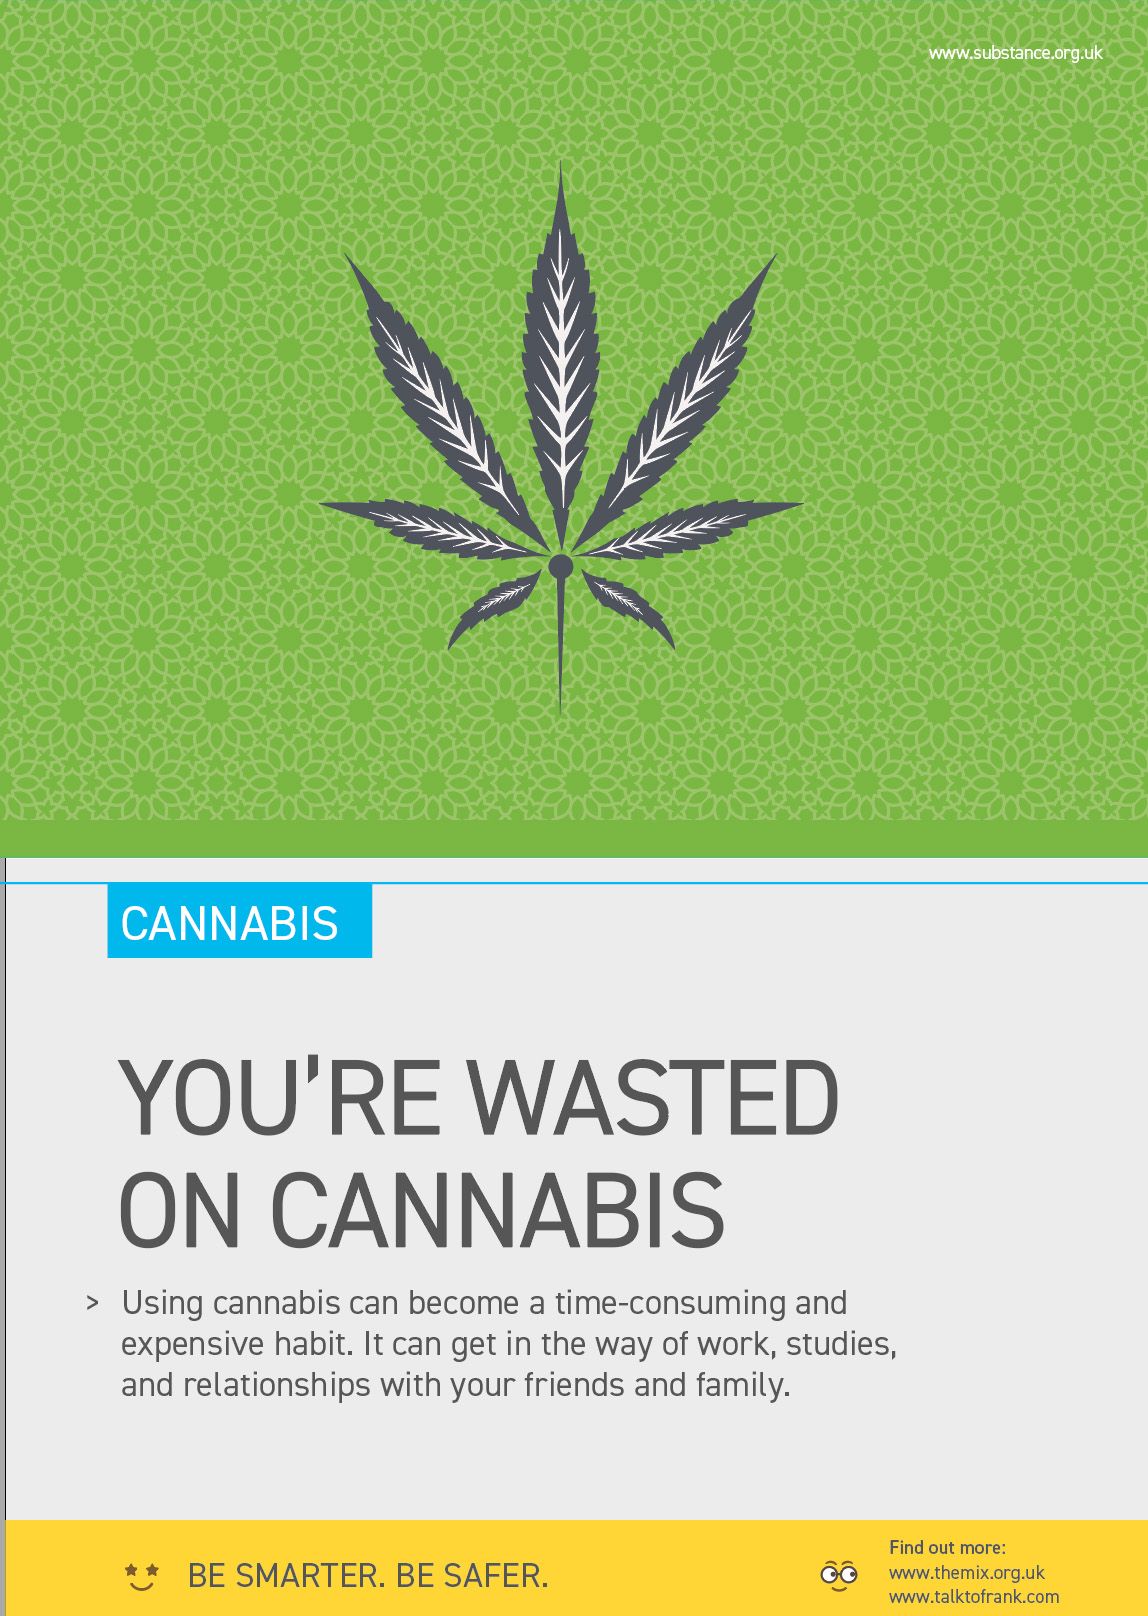 Design for Cannabis information poster